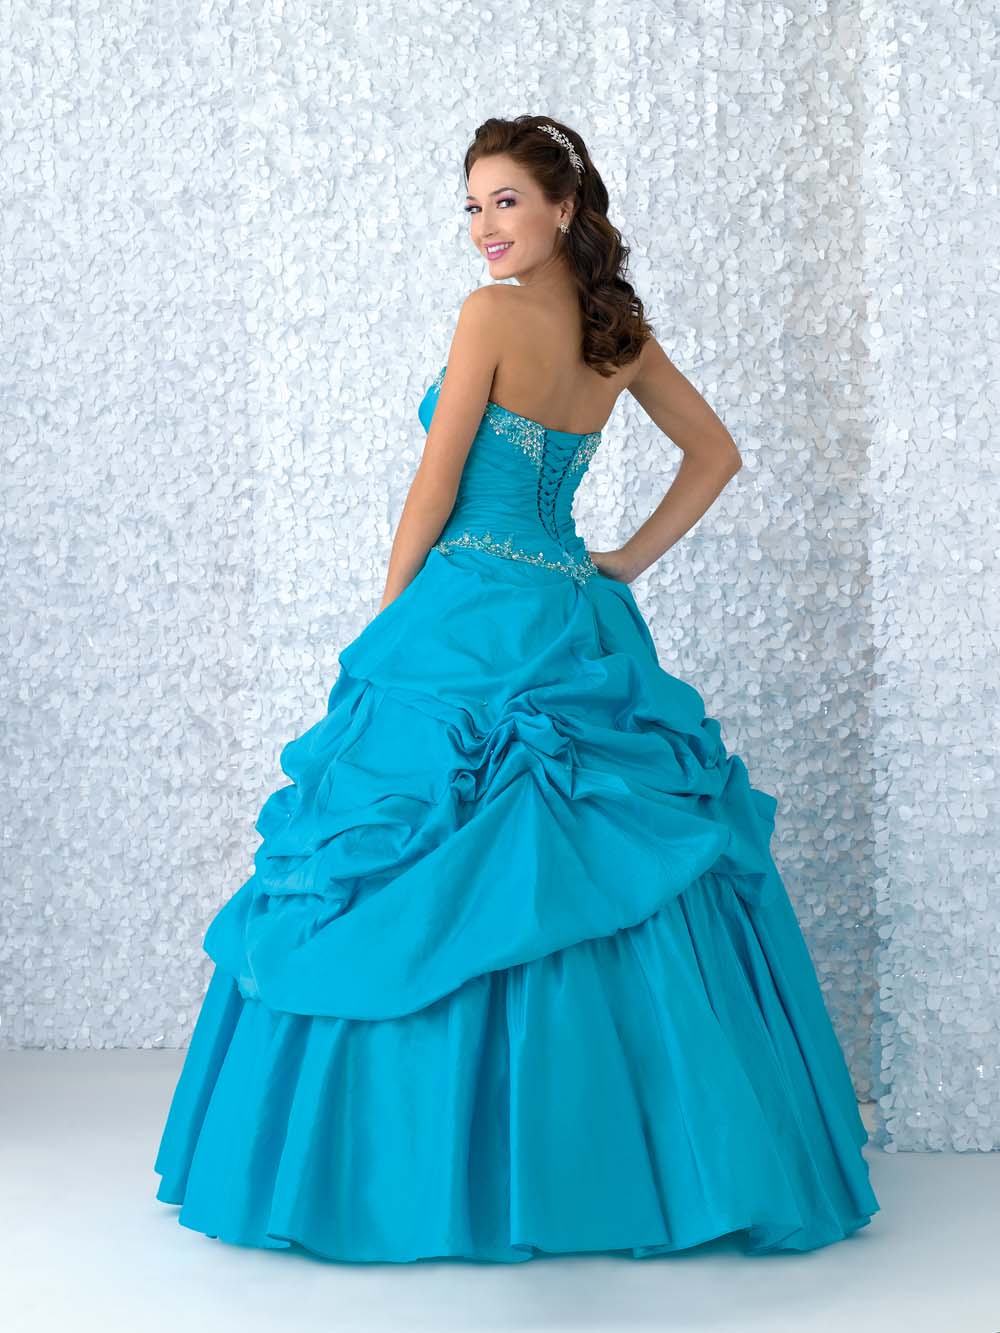 Turquoise Ball Gown Sweetheart Full Length Lace up ...